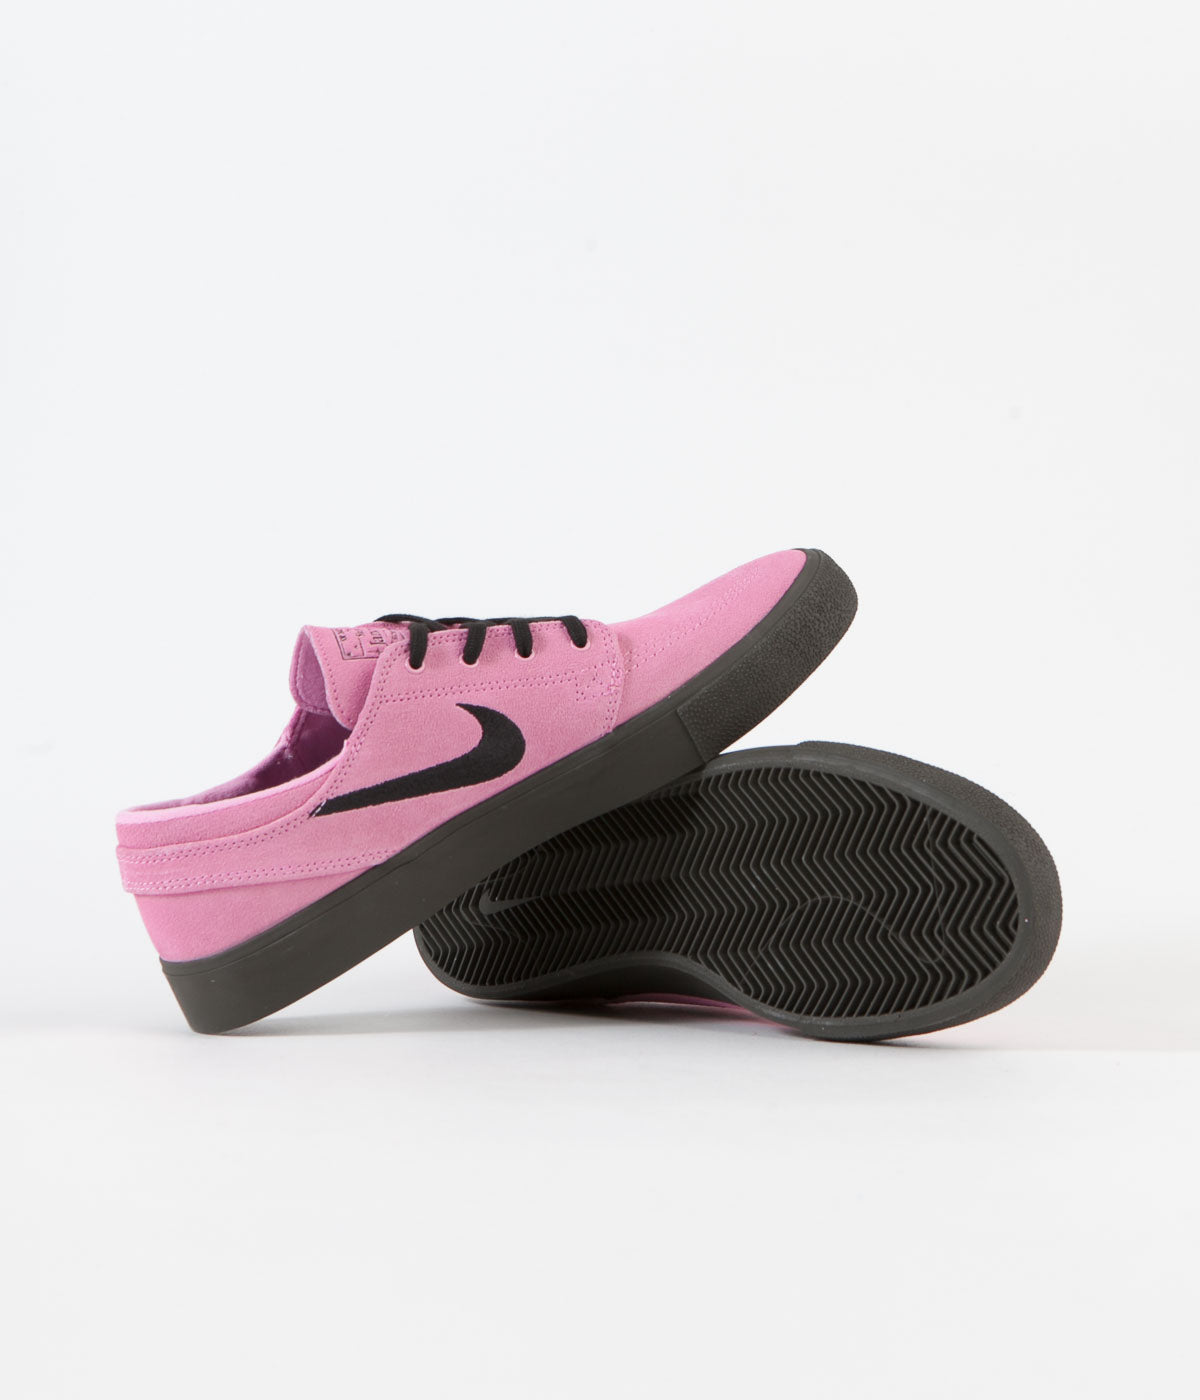 temperatur Bule Mission Pink Rise / Black - New - MnjeShops | Pink Rise - Nike SB Janoski  Remastered Shoes - nike air zoom citizen blue band schedule free